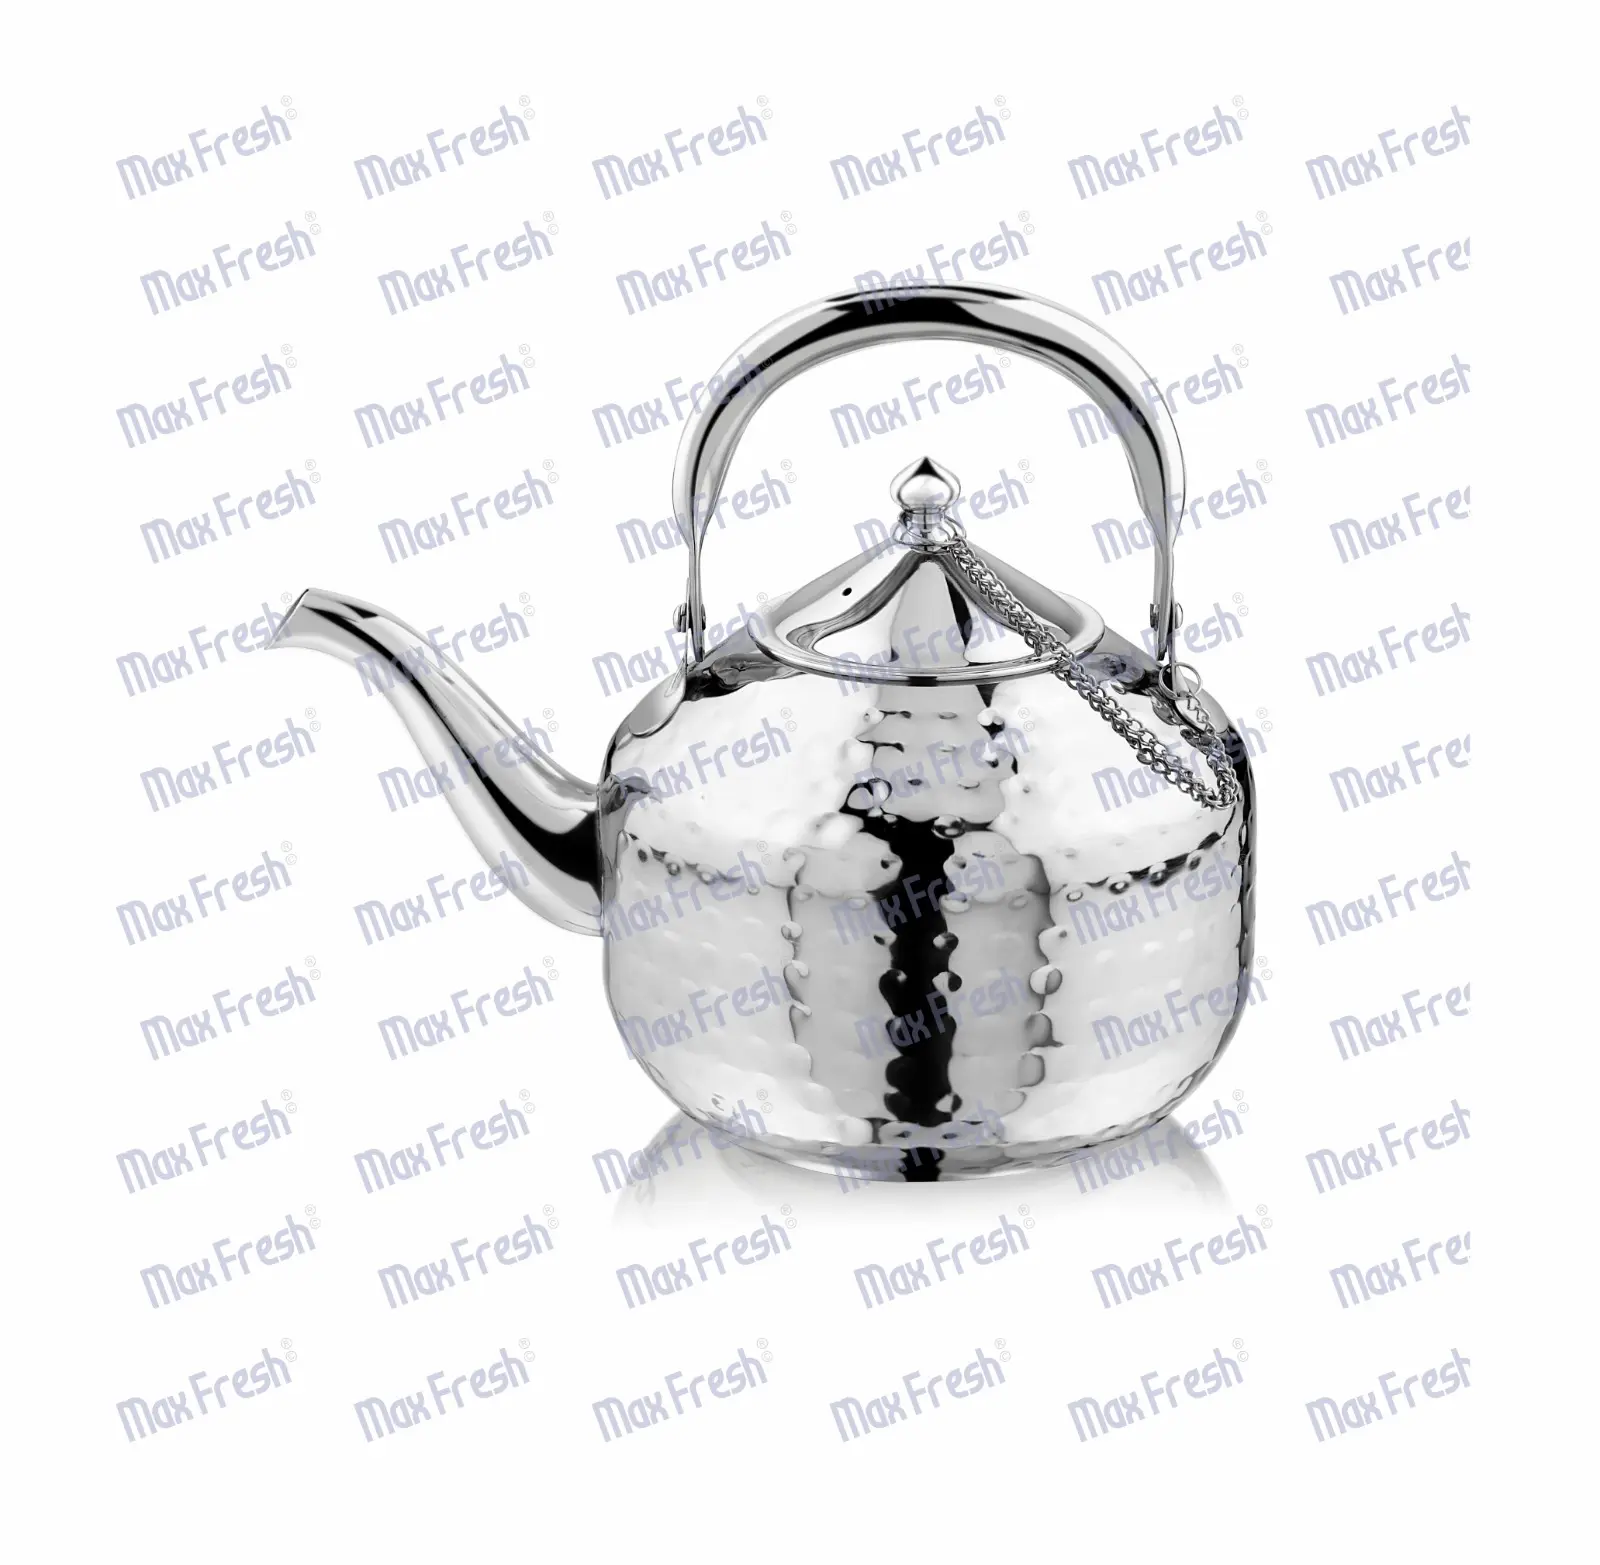 Maxfresh Arabian Hammered Stainless Steel Tea Kettle and Coffee Pot Eco - Friendly Everyday Use Water Tea Kettle